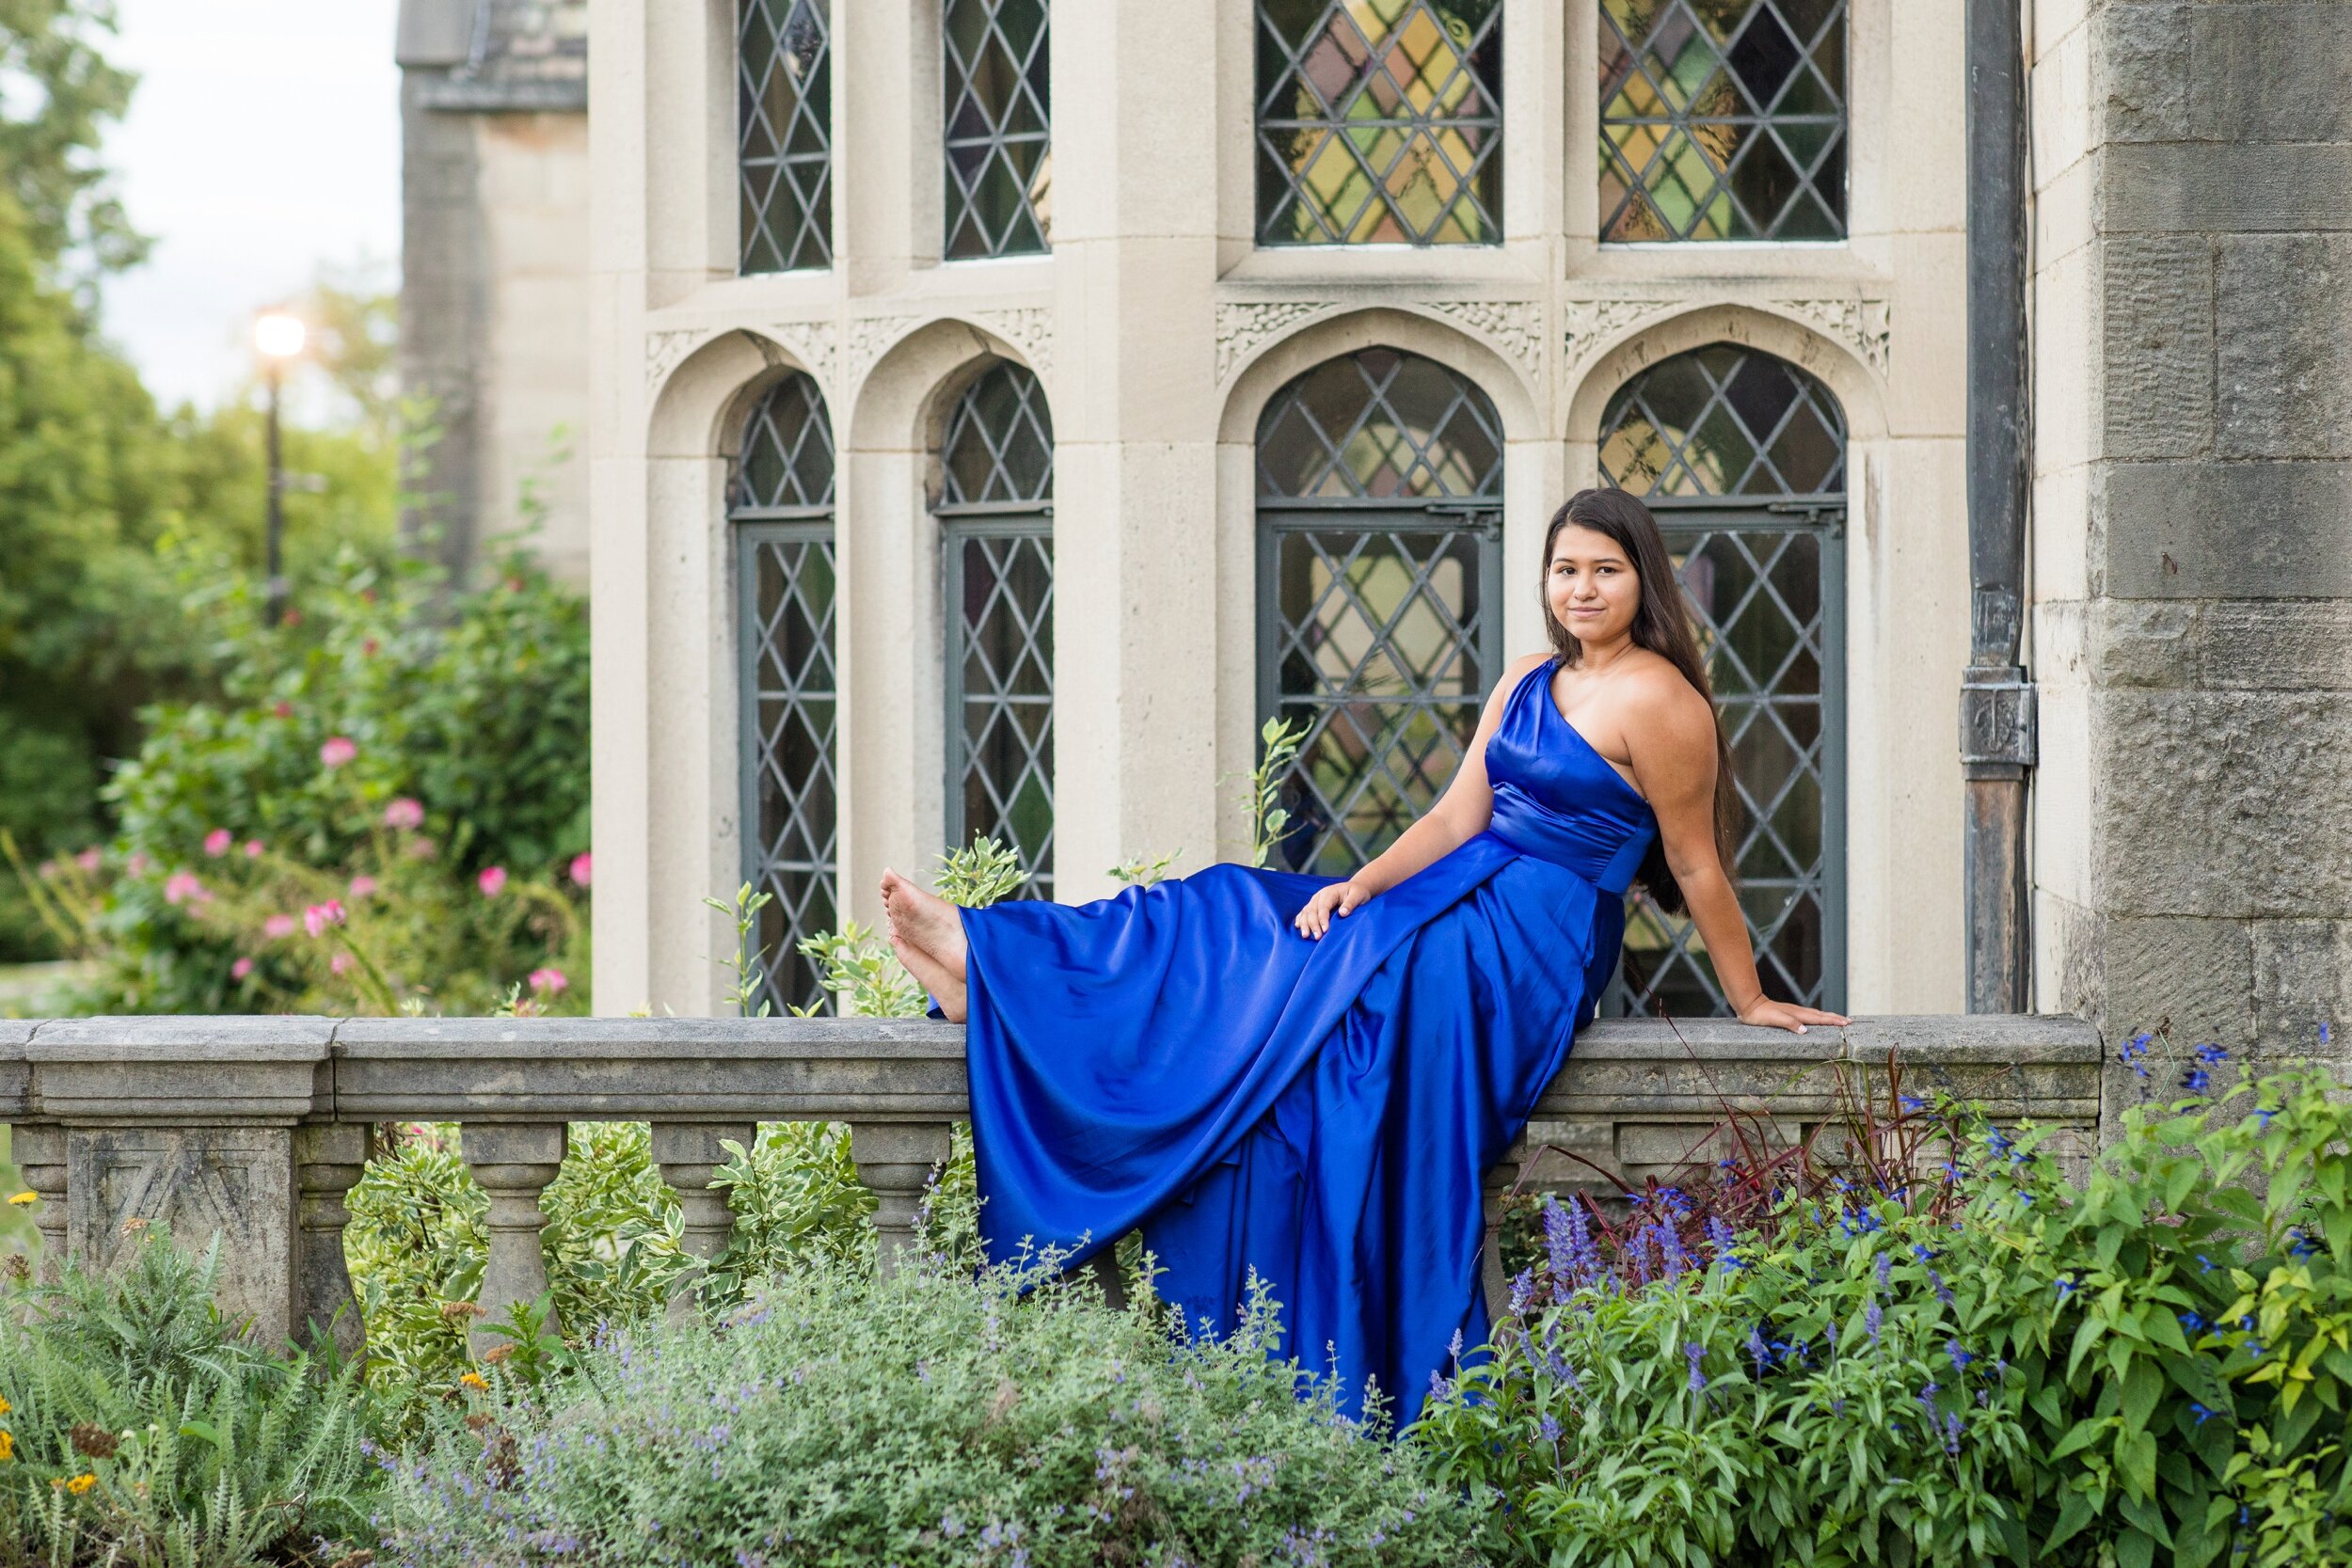 best locations for senior photos in pittsburgh, pittsburgh senior photographer, hartwood acres senior photos, cranberry township senior photographer, outfit ideas for senior photos